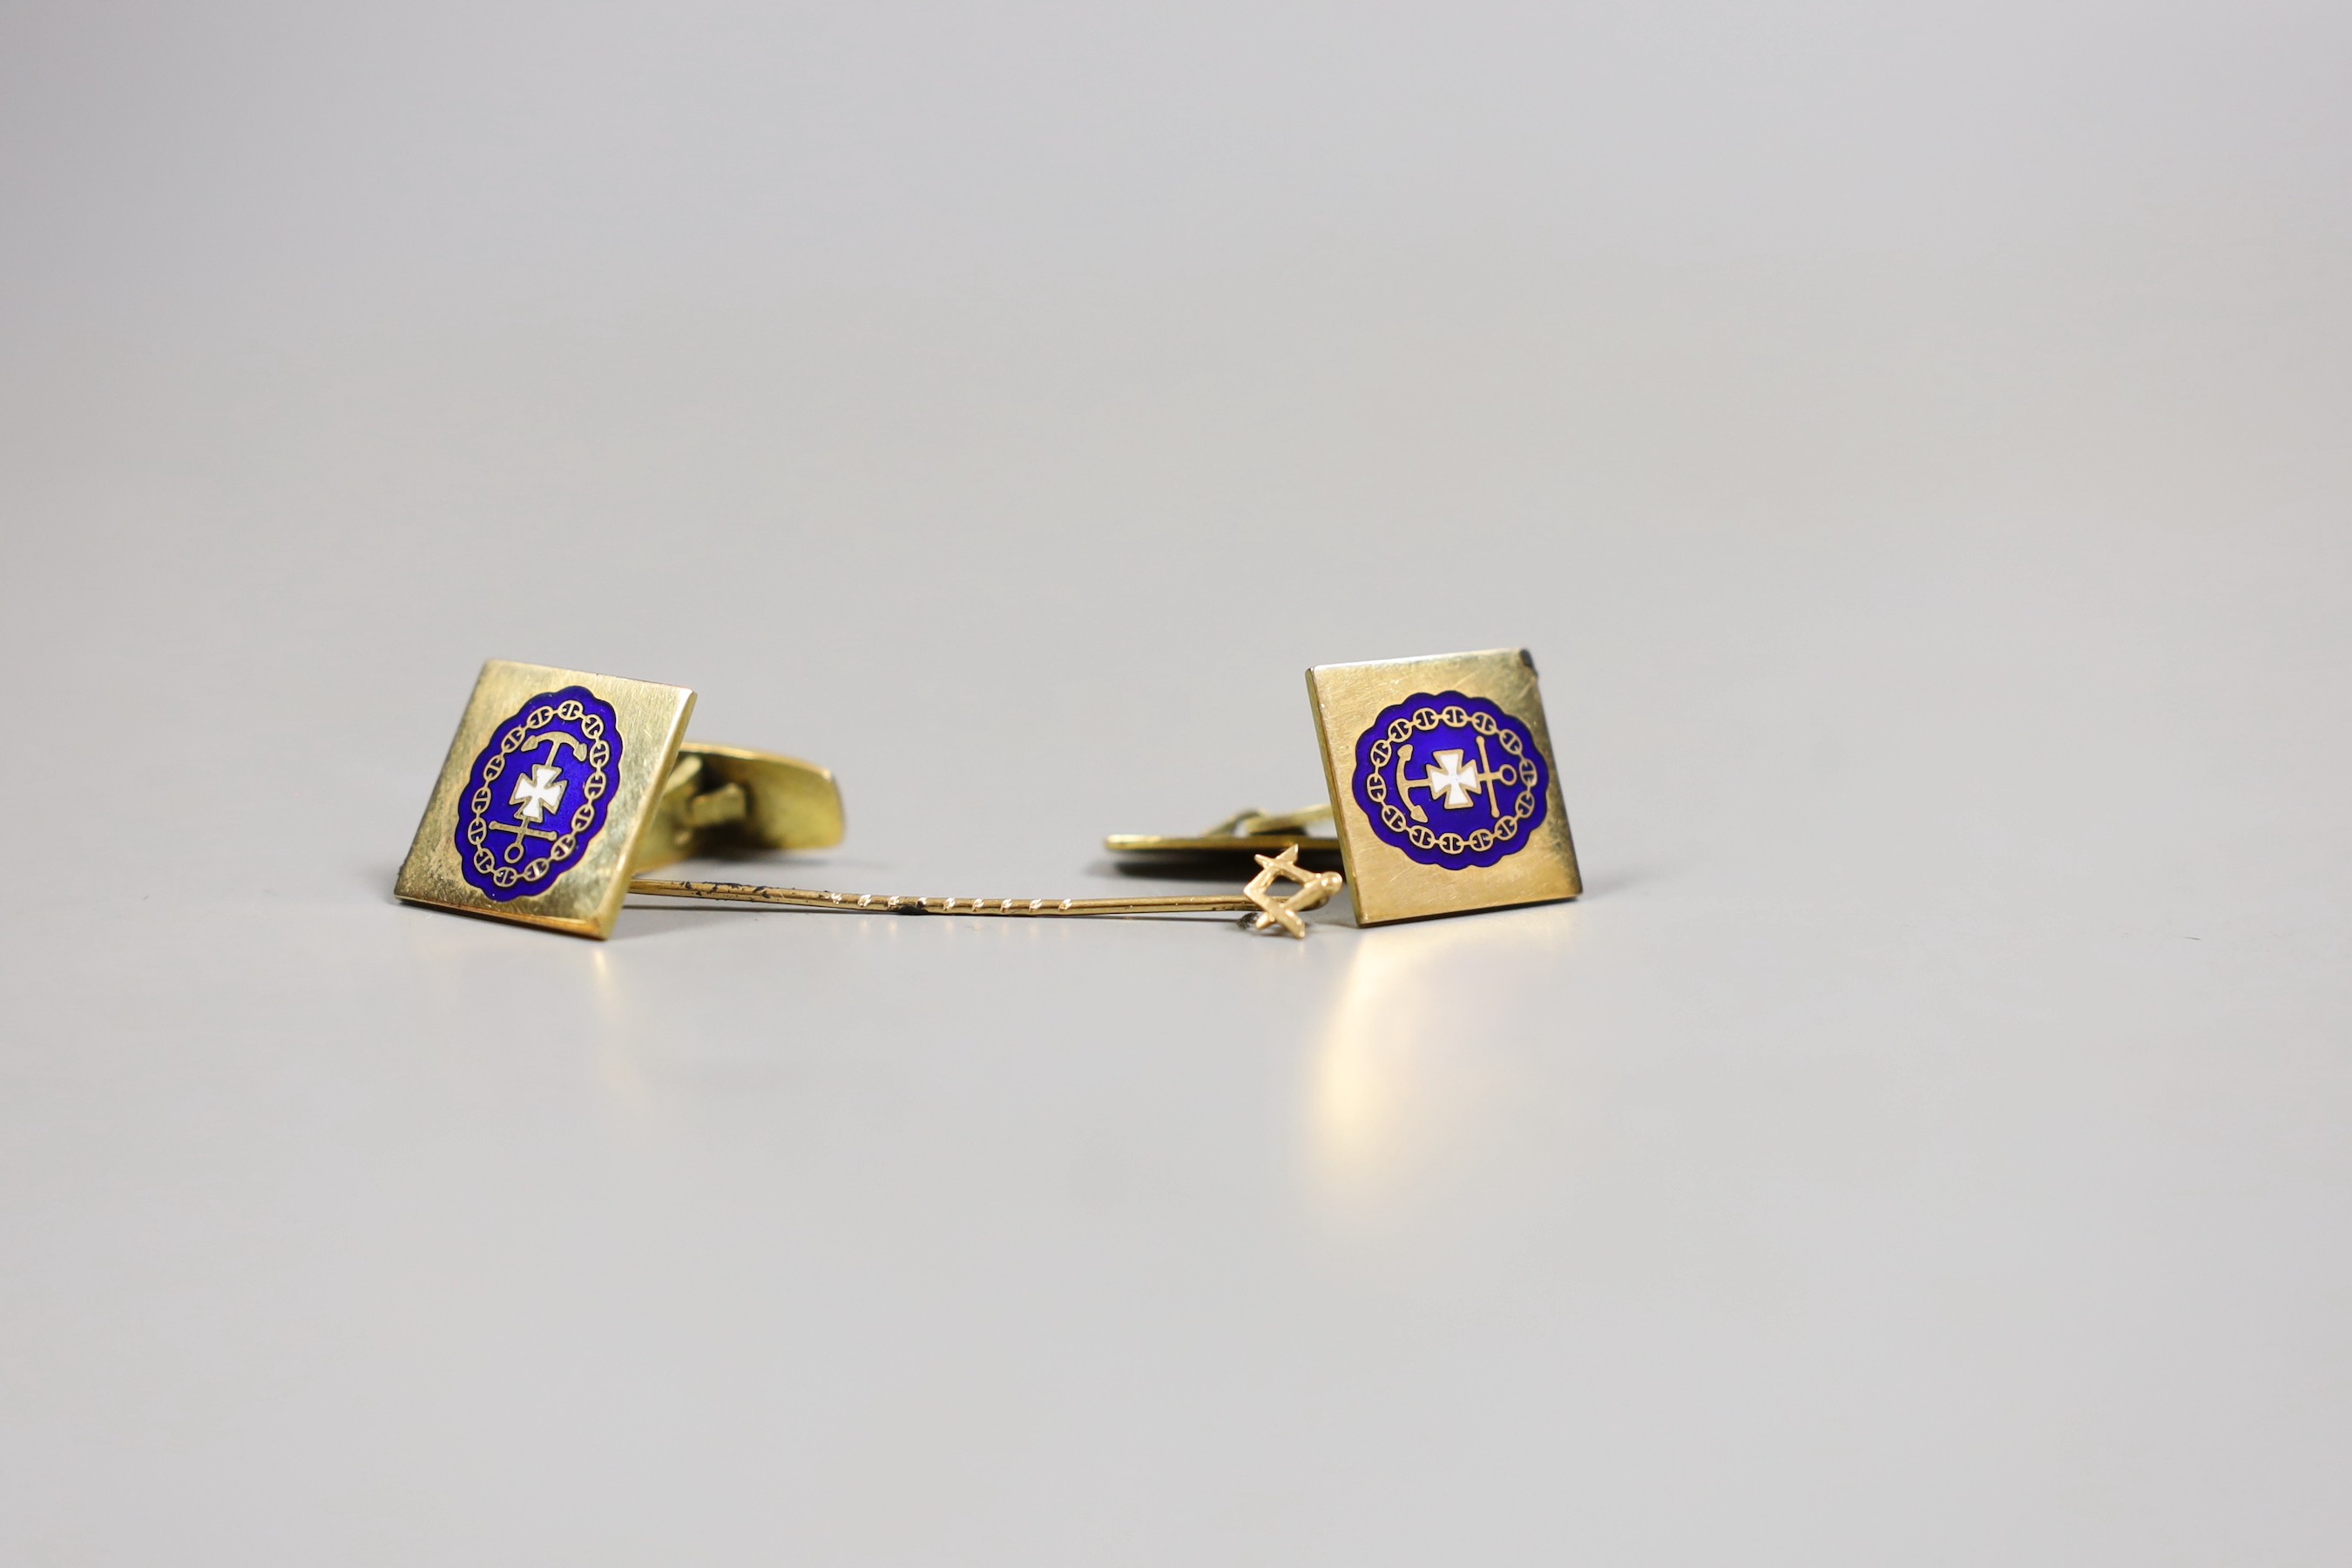 A pair of 585 and enamelled cufflinks, gross 13.8 grams and a yellow metal masonic stick pin.